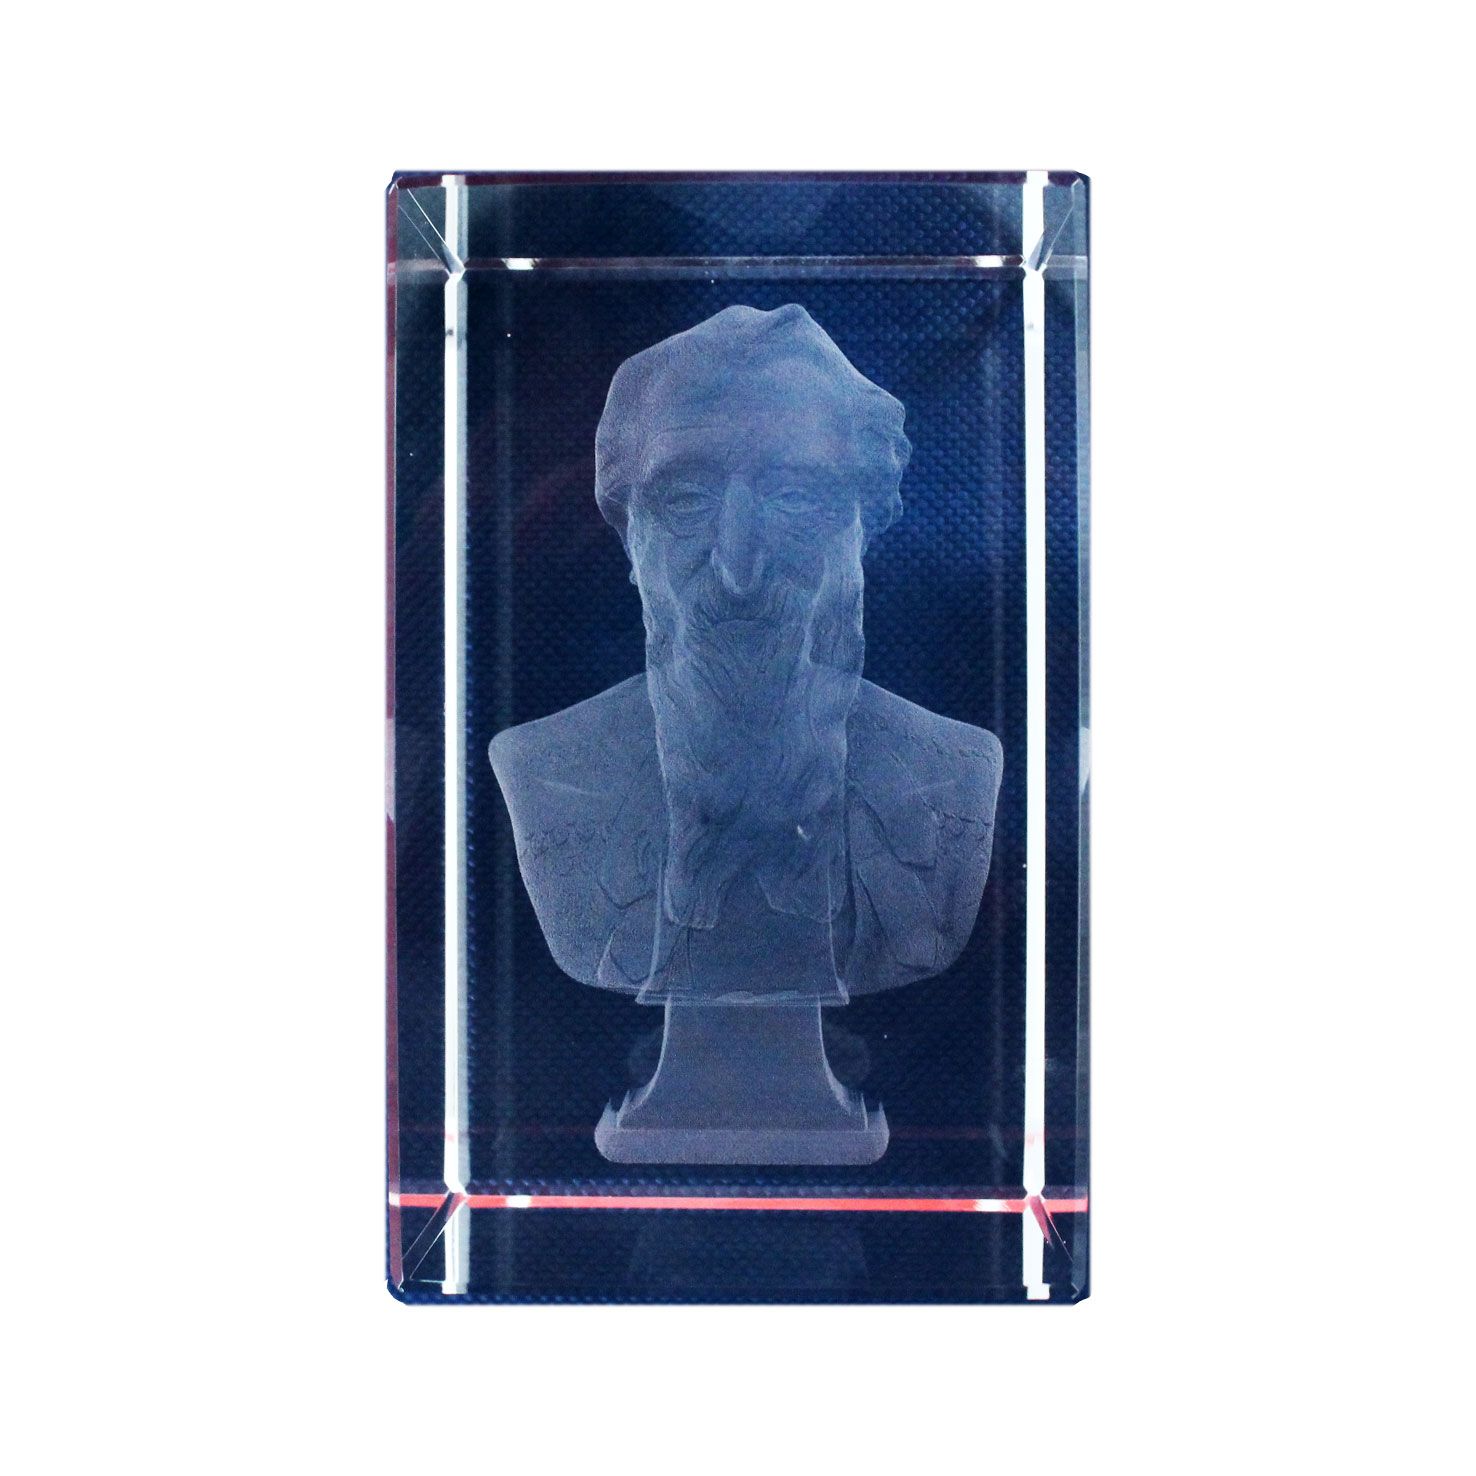 Crystal William Booth Bust